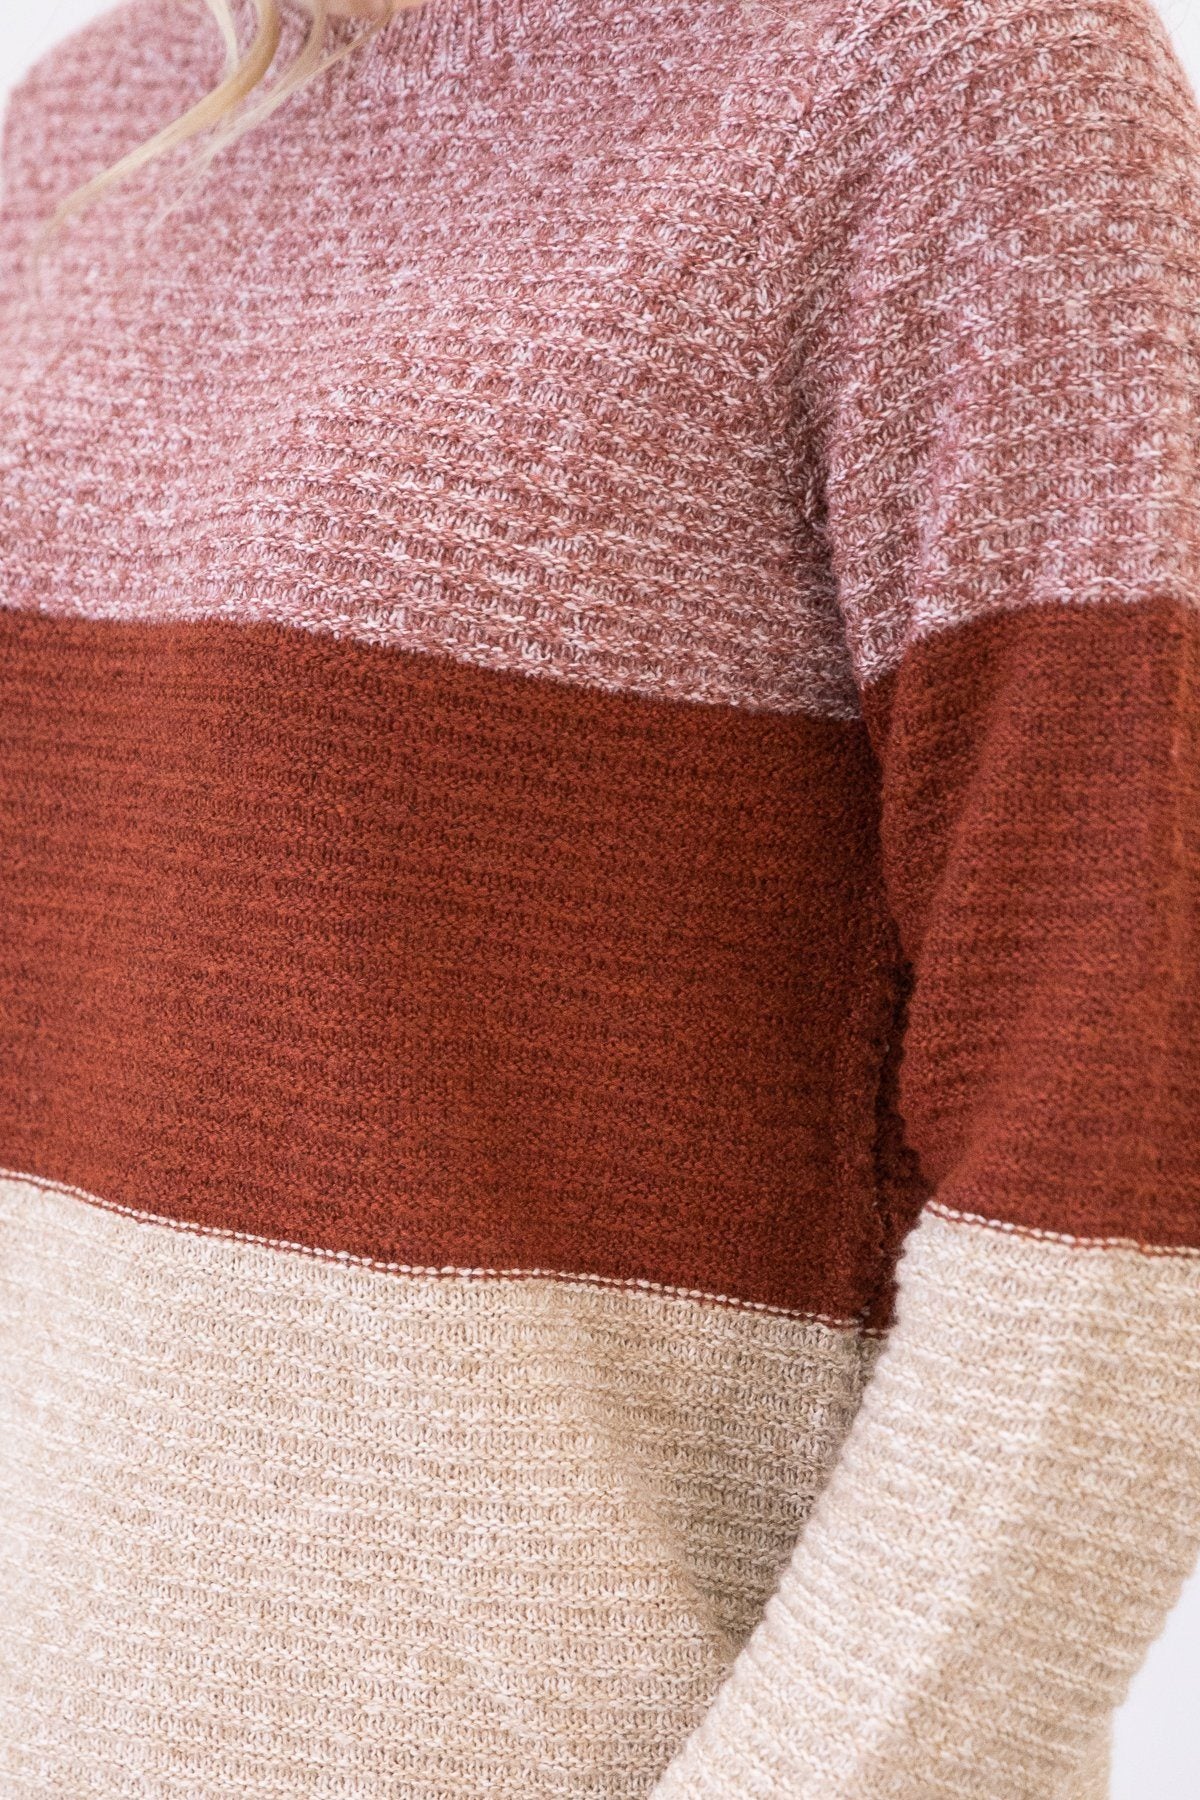 Rust and Oatmeal Colorblock Heathered Sweater - Filly Flair